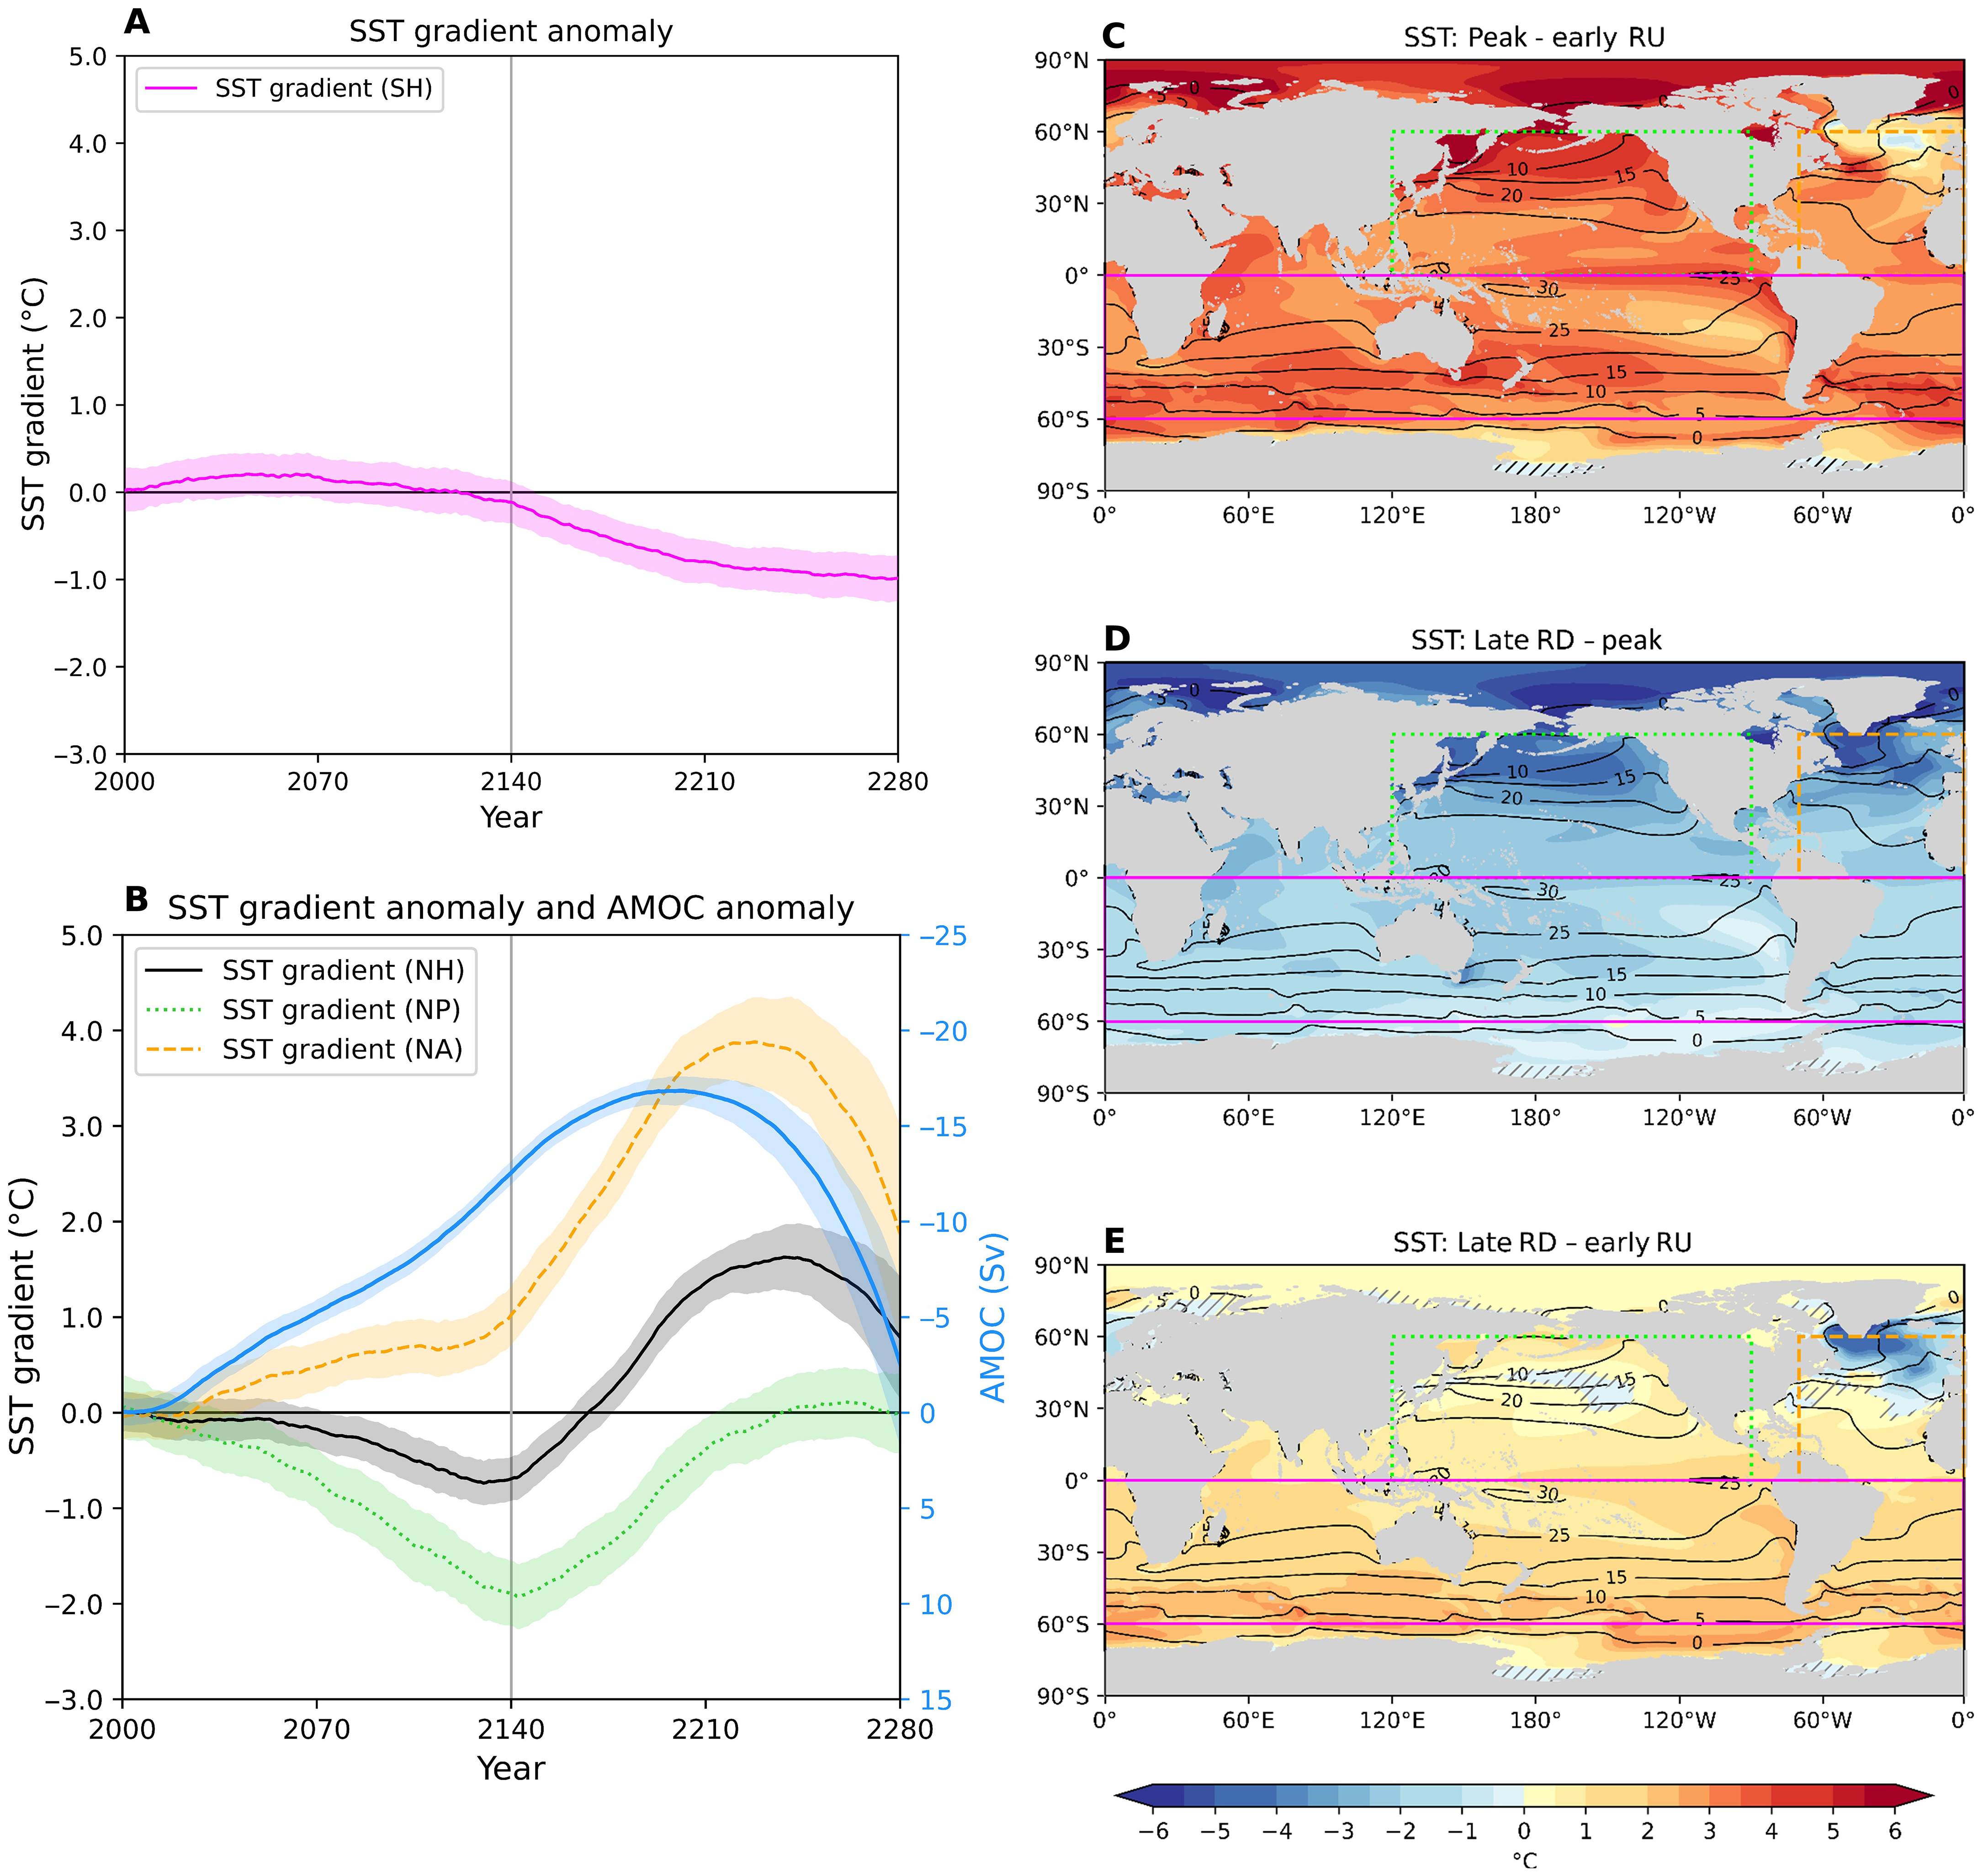 Changes of sea surface temperature (SST) gradient anomalies and the spatial distribution of SST to a changing CO2 pathway. (A) Time evolution of latitudinal gradient of sea surface temperature anomaly (unit: °C) in the SH (pink) from its PD value. (B) Same as (A) but for the NH (black), the North Pacific (NP; 120°E to 90°W, green dotted line), and the North Atlantic (NA; 70°W to 0°E, orange dashed line) sectors with the Atlantic meridional overturning circulation (AMOC) strength anomaly from its PD value (skyblue; unit: Sv). The SST gradient is determined by the SST differences from the tropics (0° to 15°) to the midlatitudes (45° to 60°) in each hemisphere. The AMOC strength is defined by averaging annual-mean Atlantic meridional ocean stream function within the latitudinal band from 35°N to 45°N at a depth of 1000 m. Note that the weakening of AMOC is upwards in the right axis in (B). All values are based on the ensemble mean of 28 members (subjected to an 11-year running mean), with their 1 SD ranges across the ensemble members marked with shading. (C to E) SST changes (unit: °C) for peak (2121–2160) minus early RU (2001–2040) periods, late RD (2241–2280) minus peak periods, and late RD minus early RU periods, respectively. Climatological SST in the PD climate (unit: °C) is contoured in (C) to (E). The hatched regions in (C) to (E) indicate where temperature changes are statistically insignificant at the 95 percent confidence level. The SH, NP, and NA sectors for the SST gradient in (A) and (B) are denoted by colored boxes in (C) to (E). Graphic: Kim, et al., 2023 / Science Advances